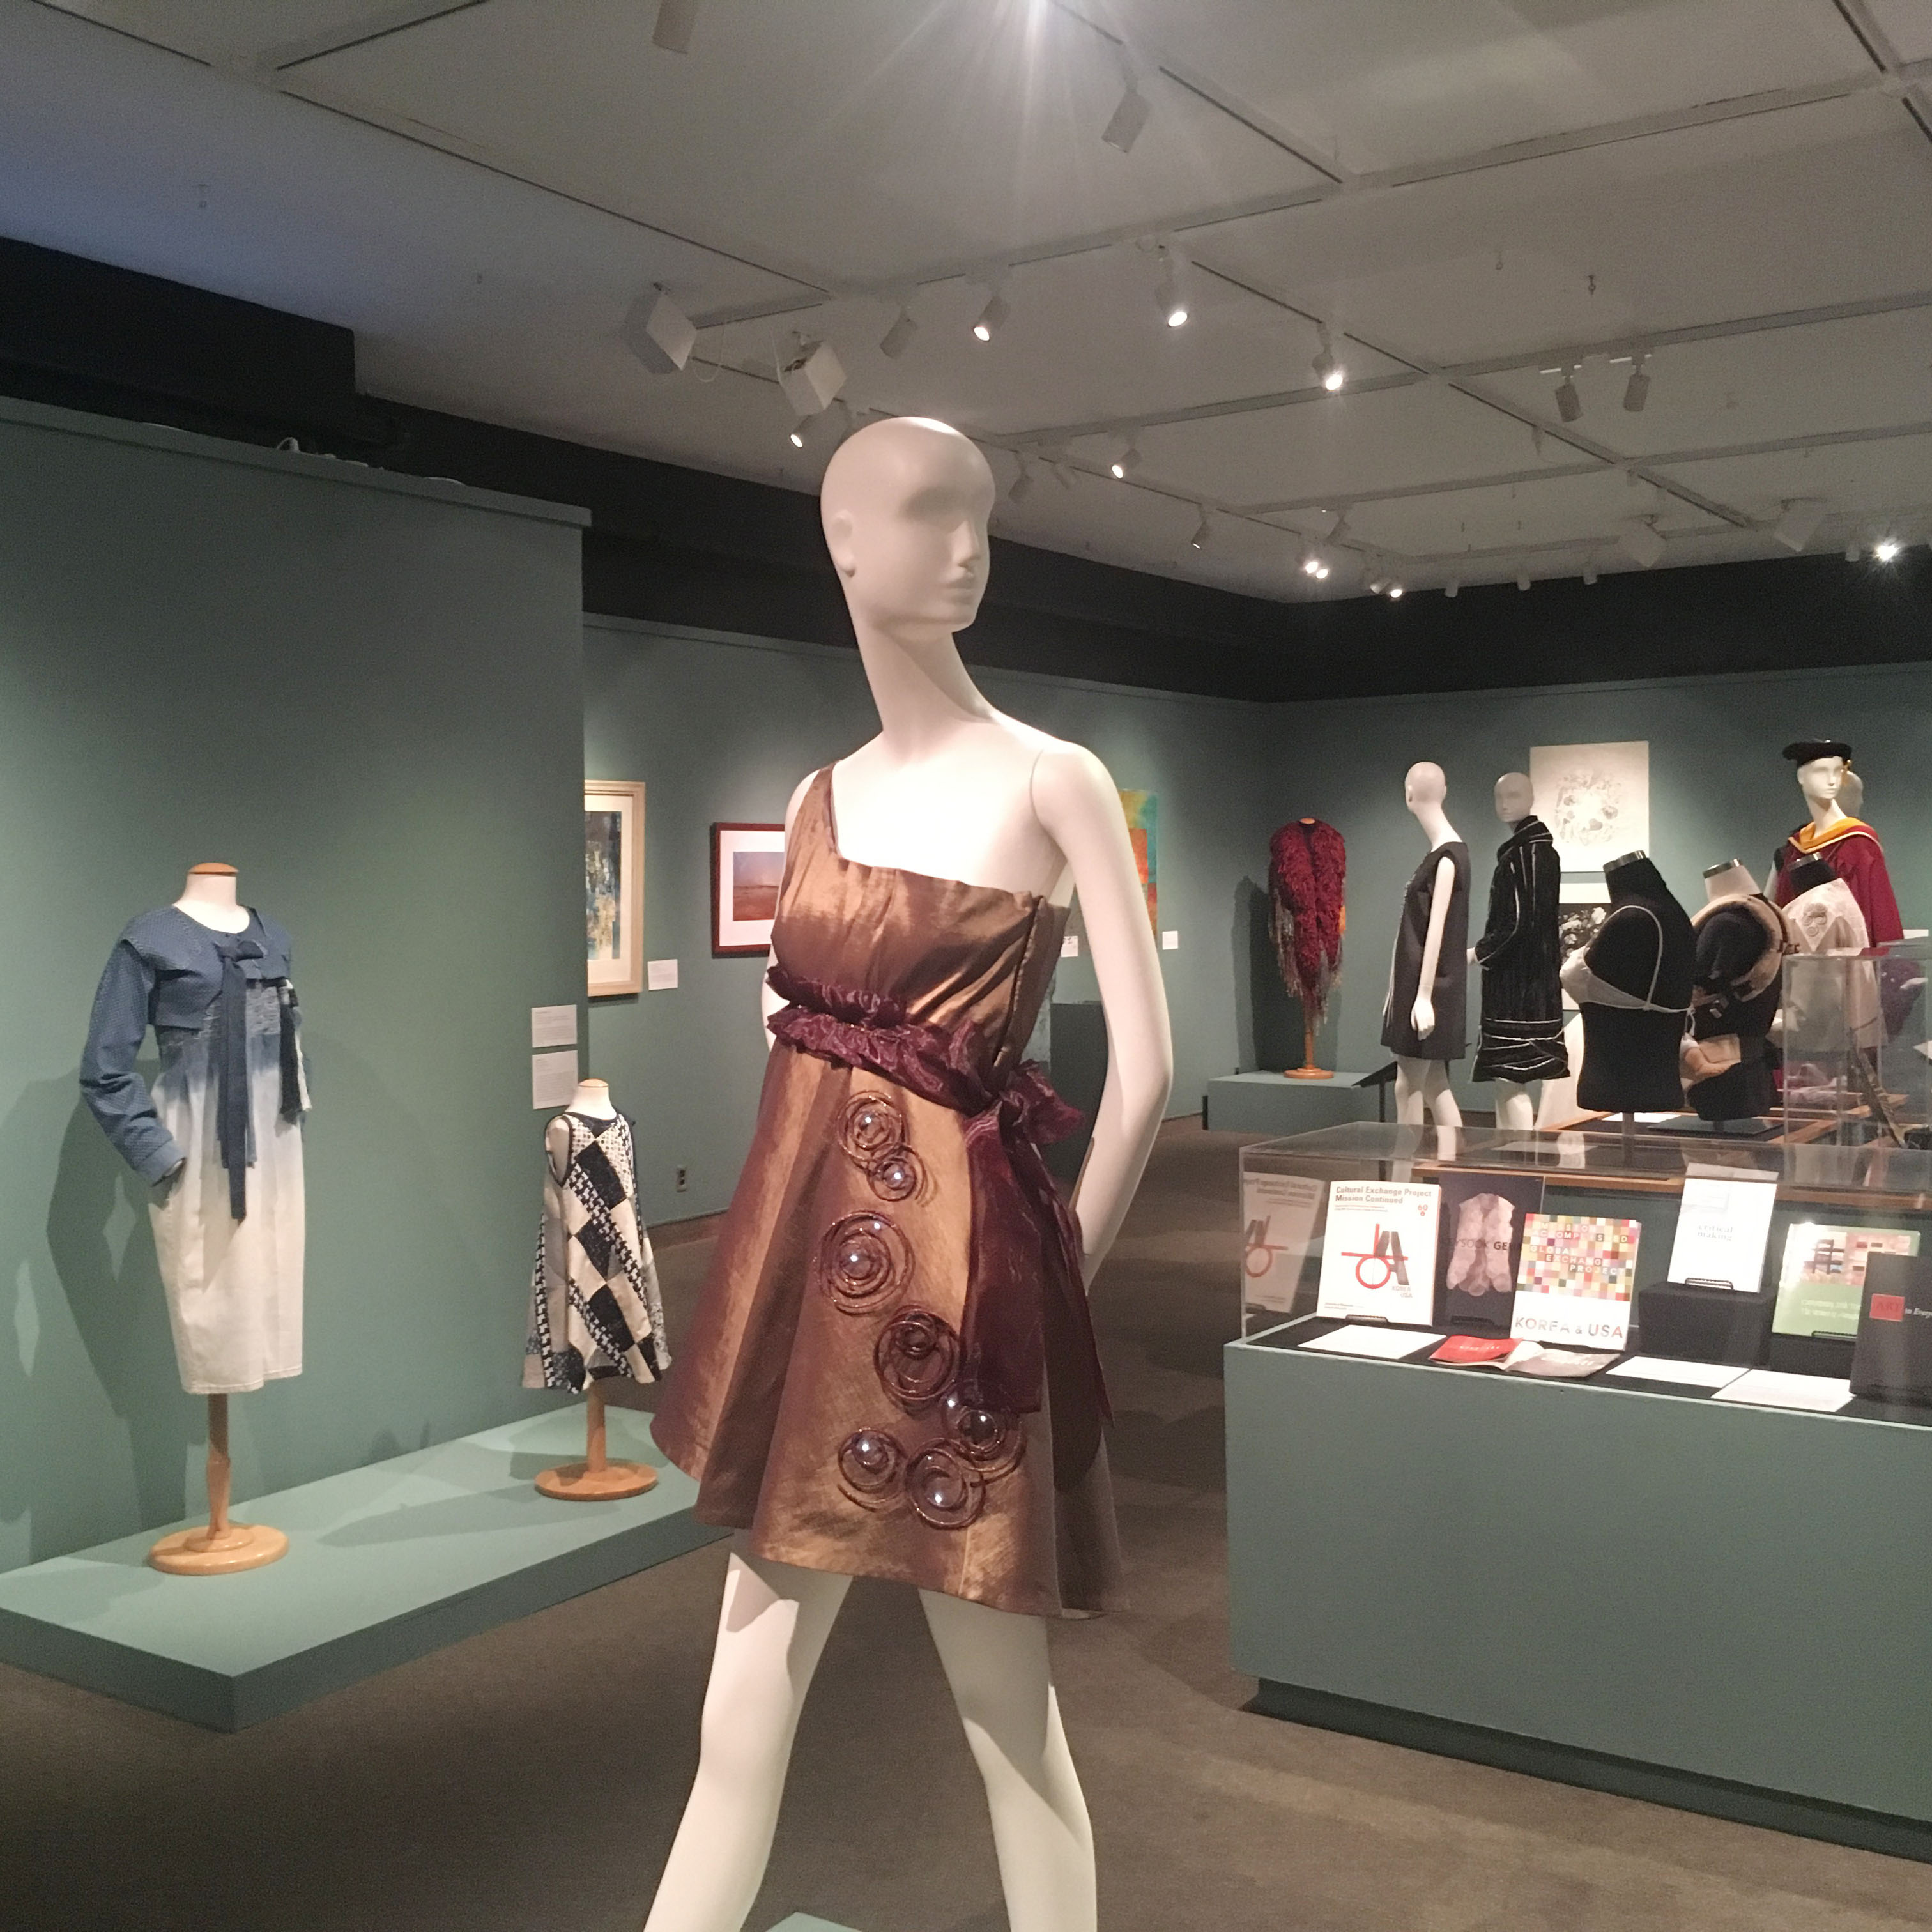 DHA 100 years of graduate education exhibition gallery with clothing and books on display